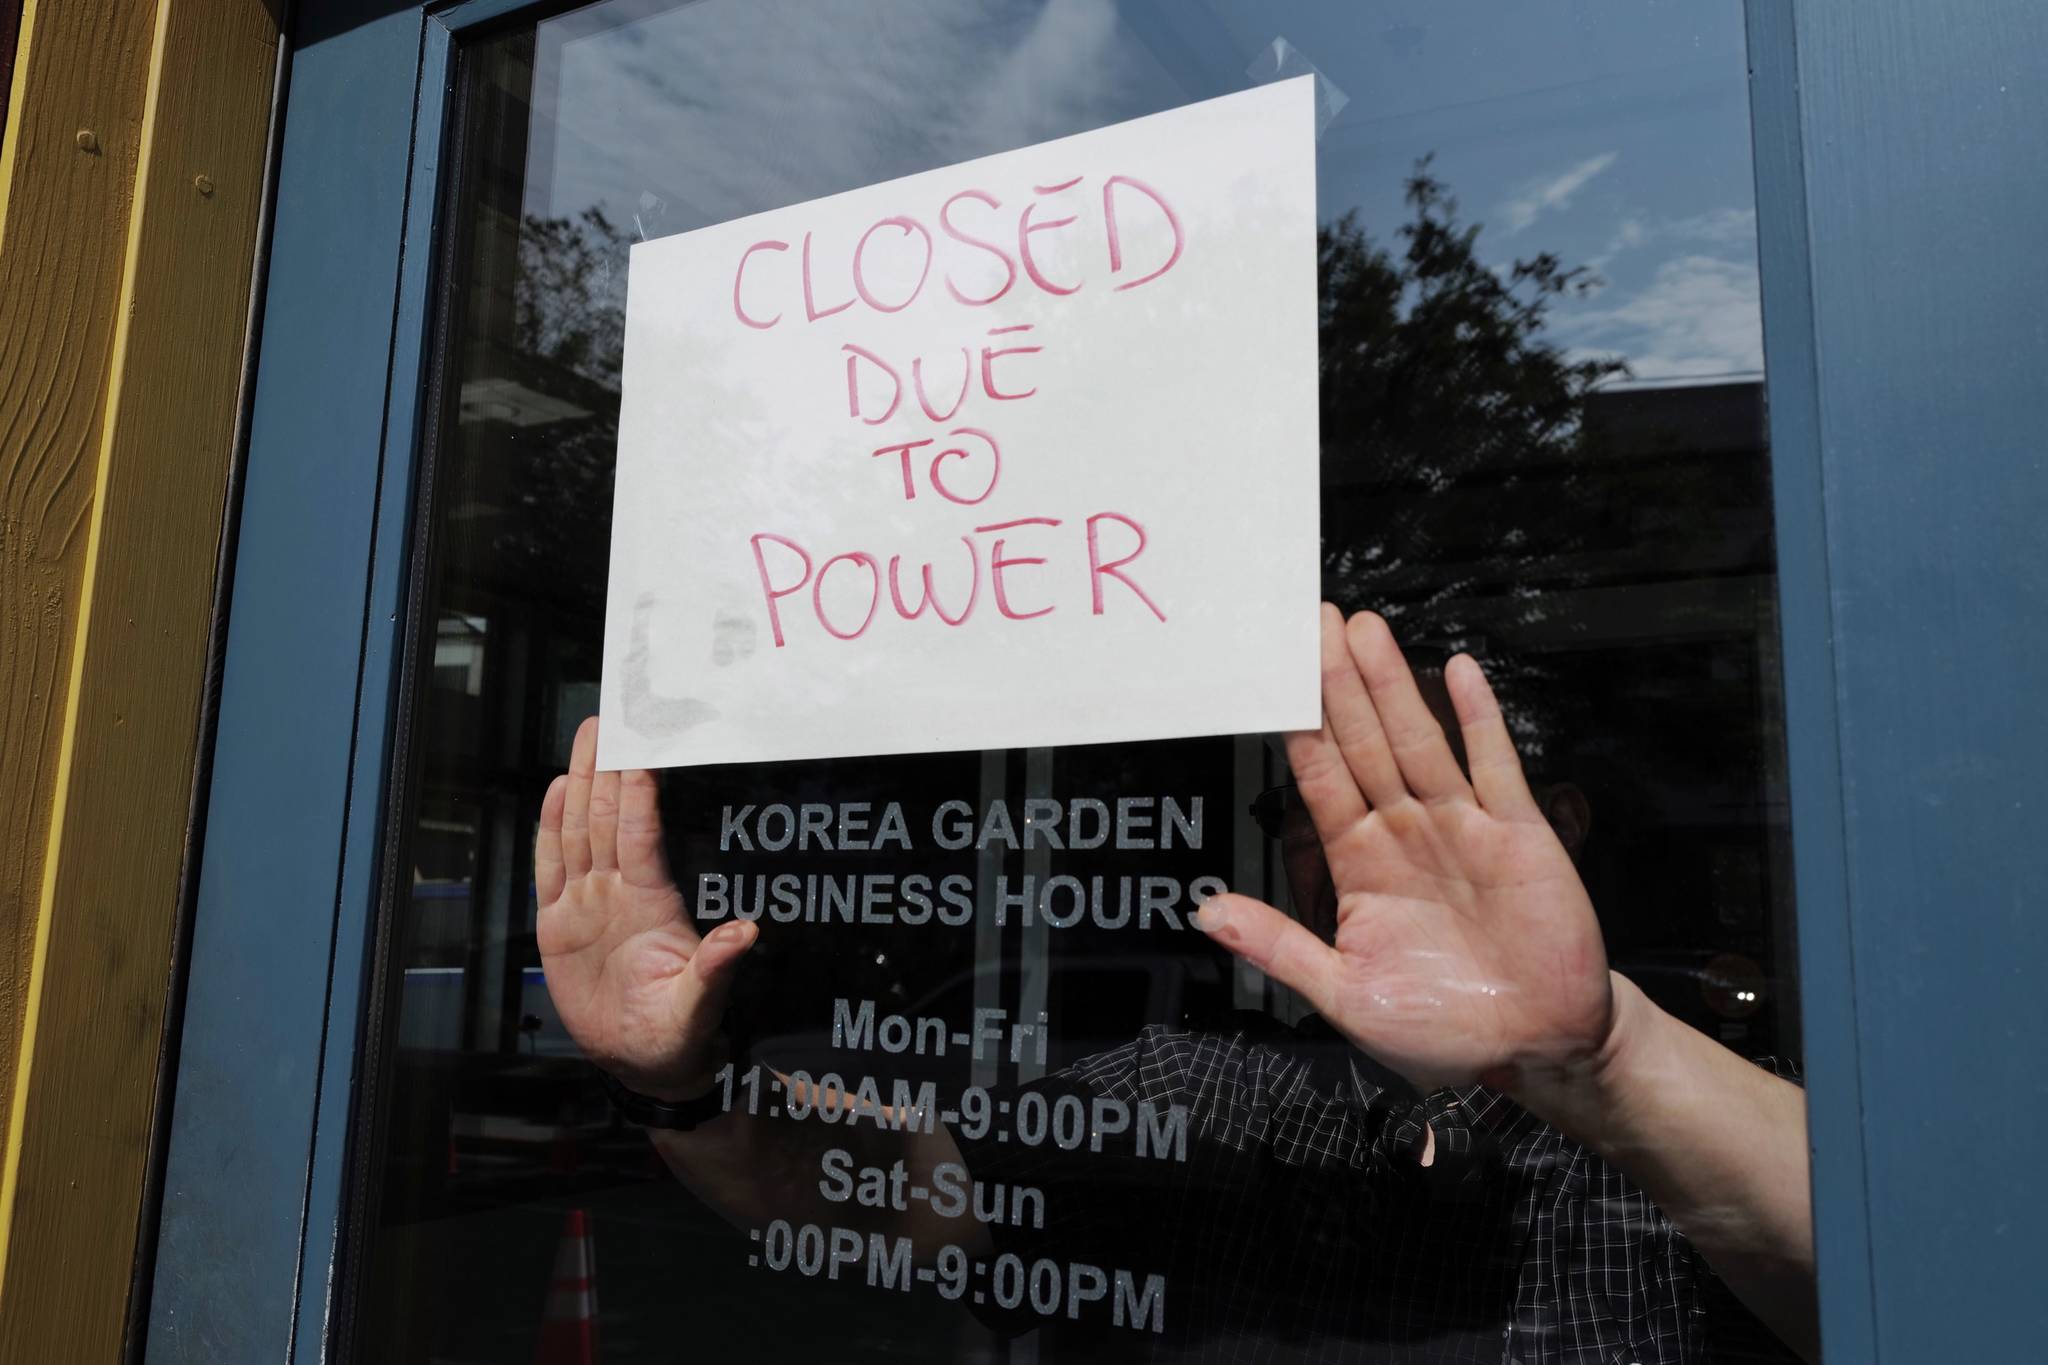 Steven DeVoss, manager of Korea Garden on Front Street, puts up a sign to closed his business before noon on Wednesday, July 31, 2019. (Michael Penn | Juneau Empire)